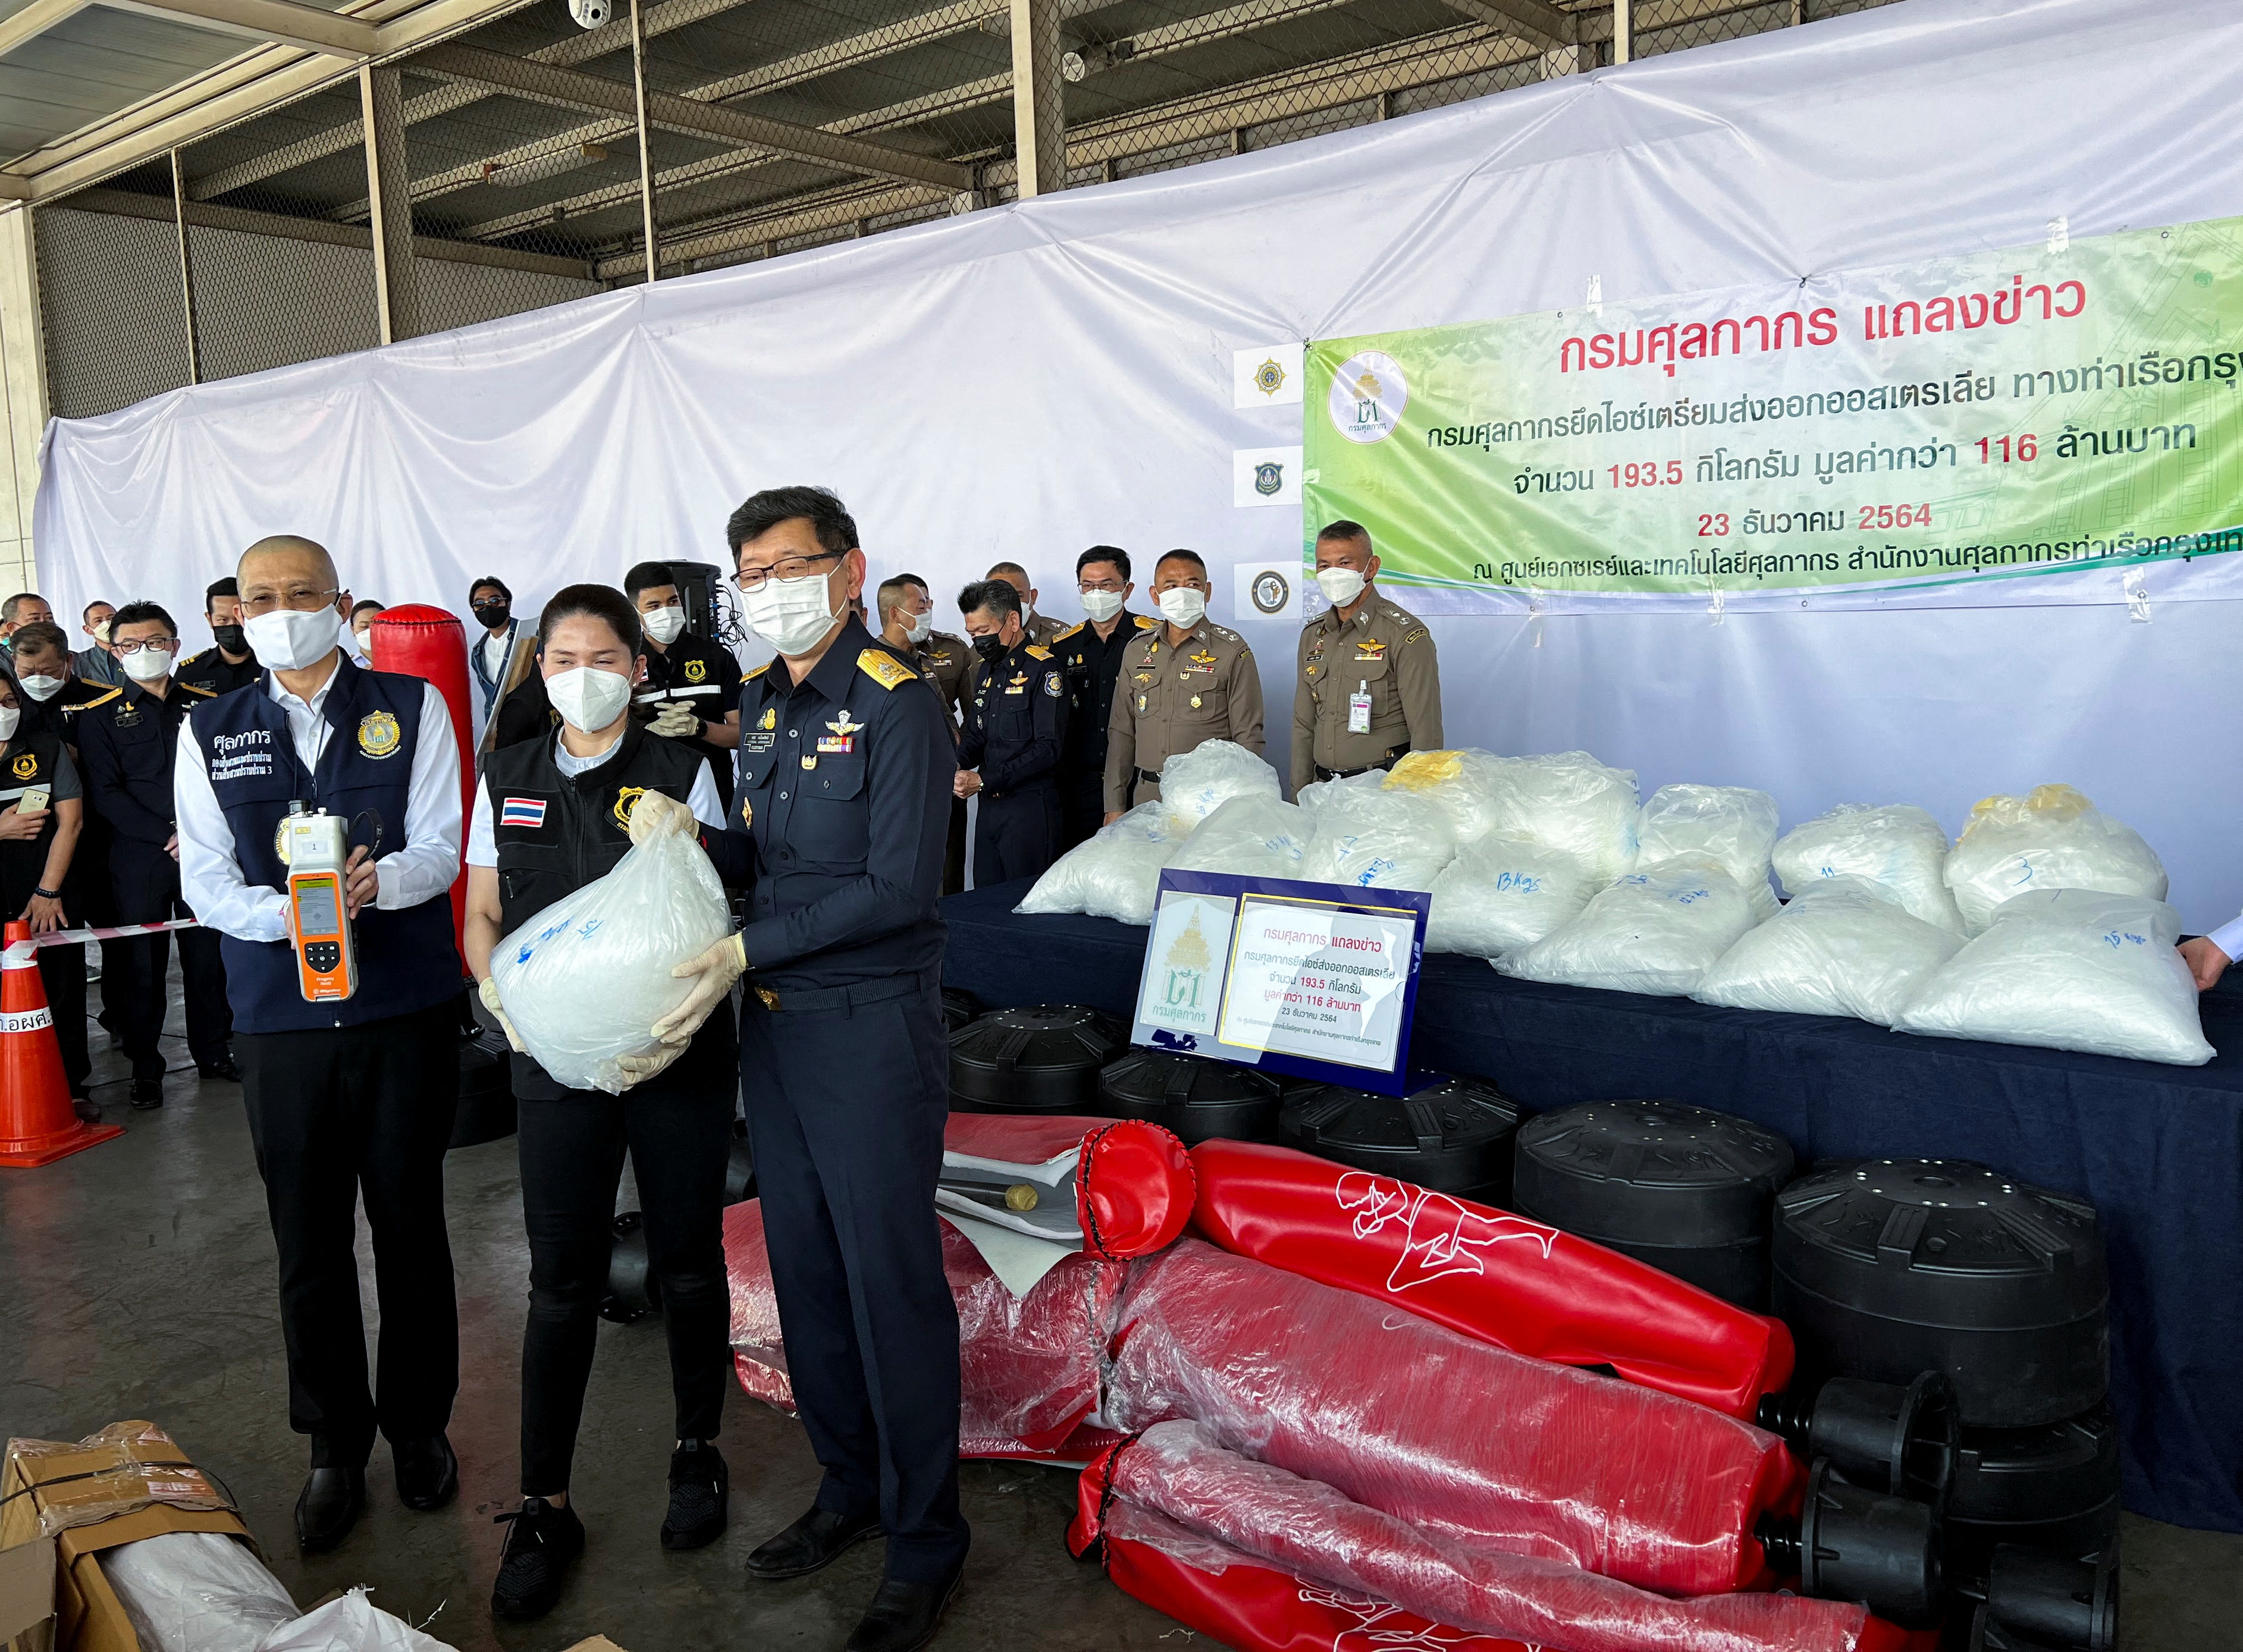 Officials show amphetamine seized in a Thailand port, in Bangkok